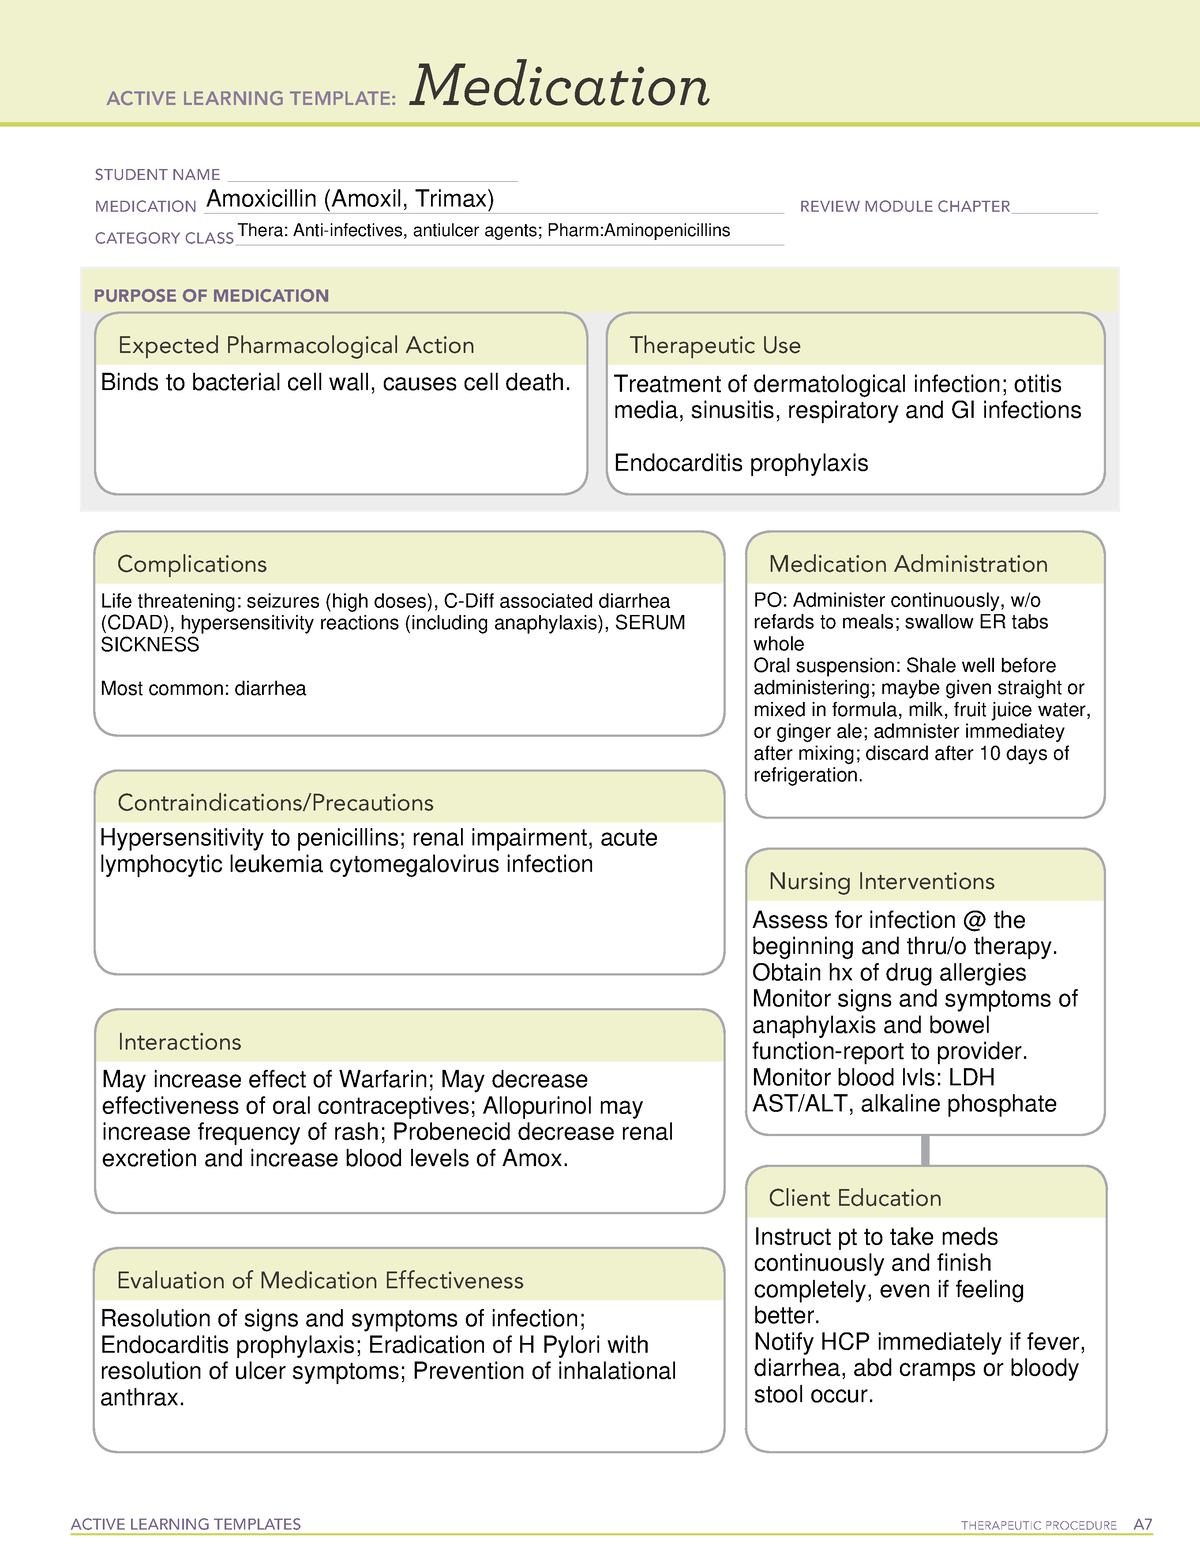 Amoxicillin ATI MED TEMPLATE ACTIVE LEARNING TEMPLATES THERAPEUTIC